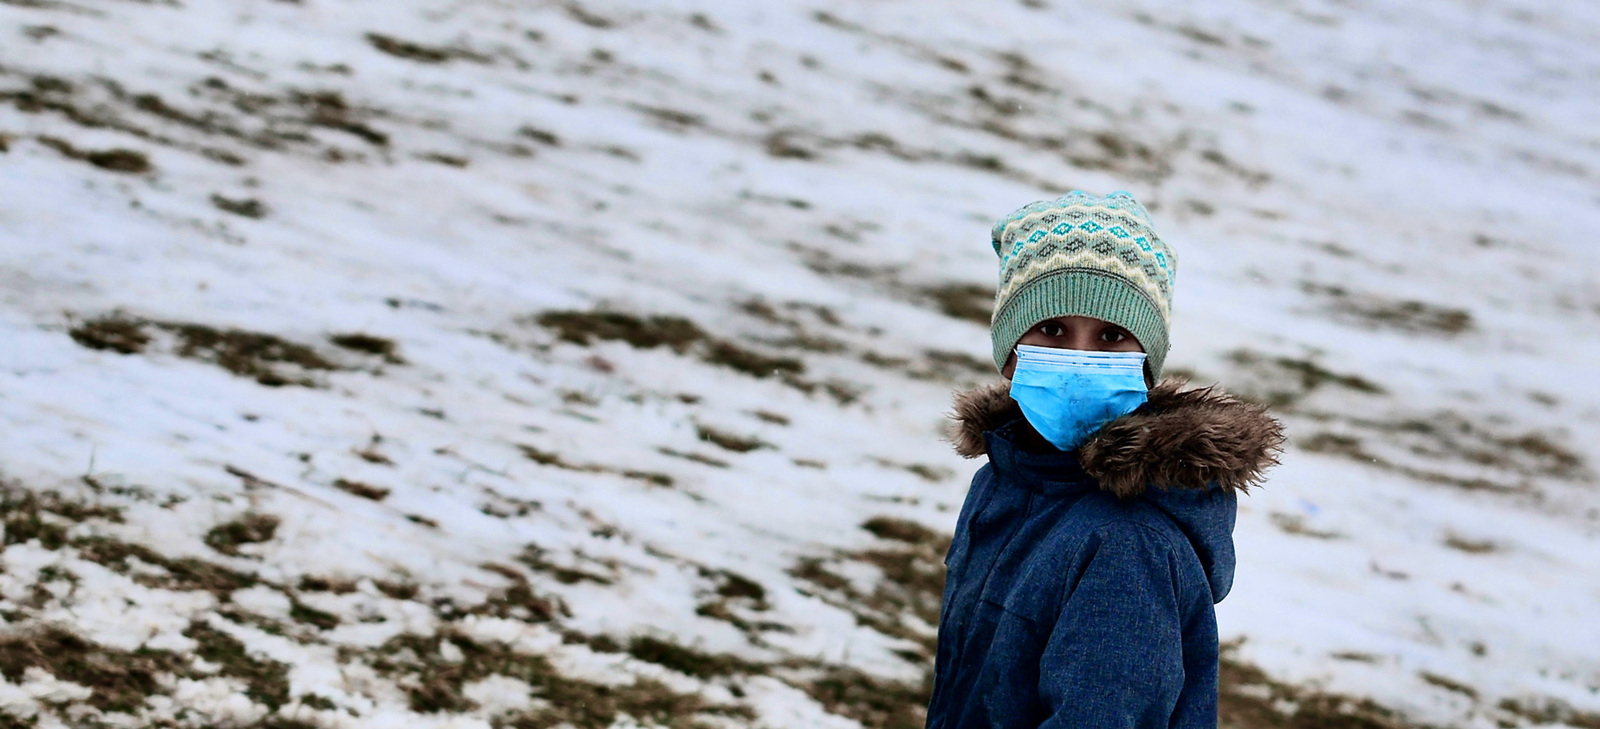 Photograph, Boy in a blue mask series, resilience in snow,